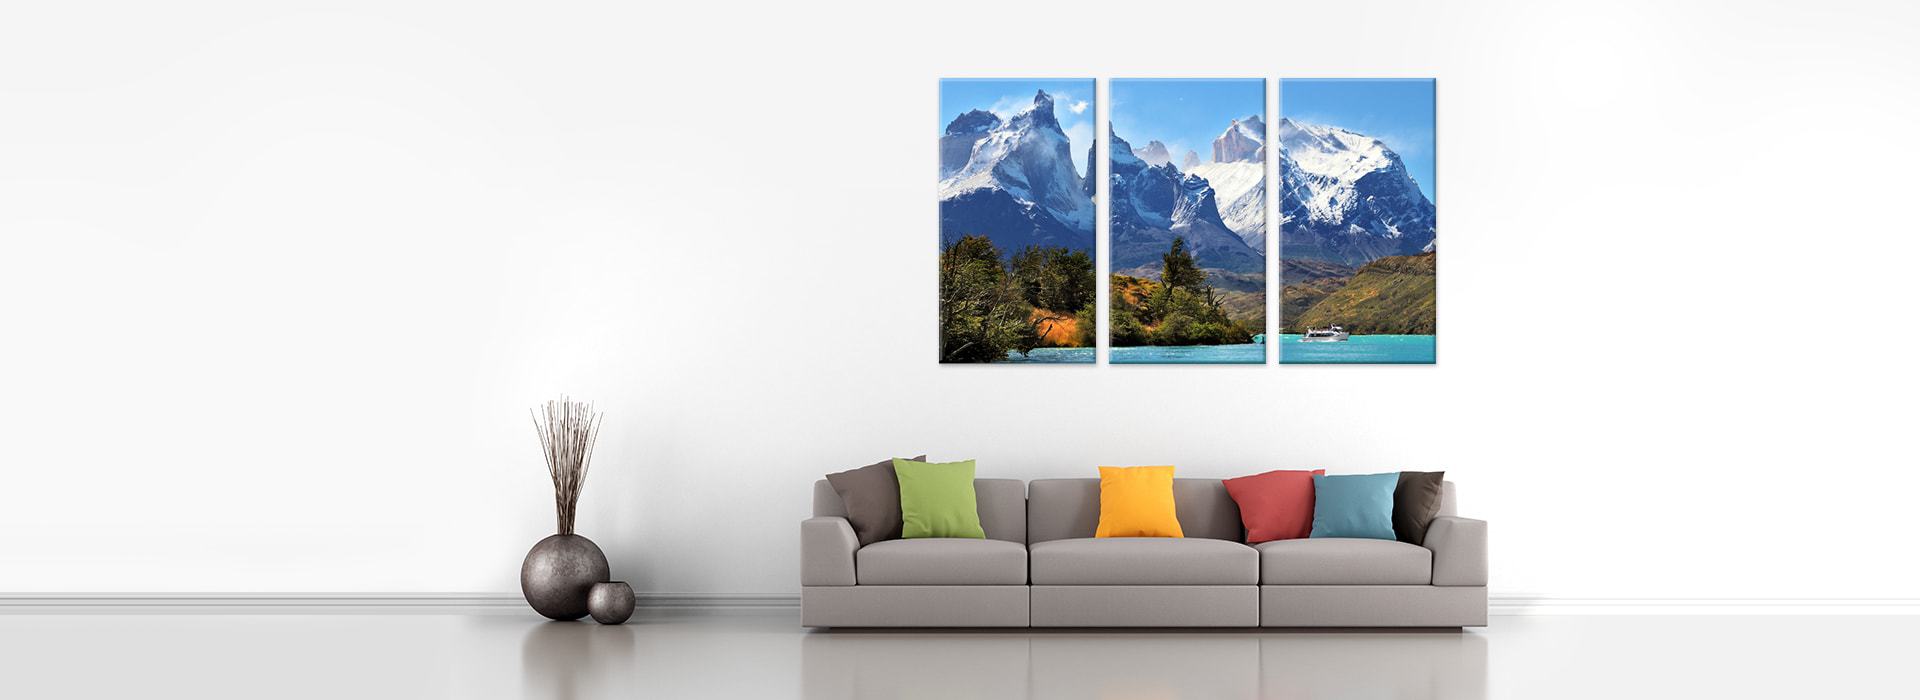 What advantages custom canvas prints offer over normal prints?